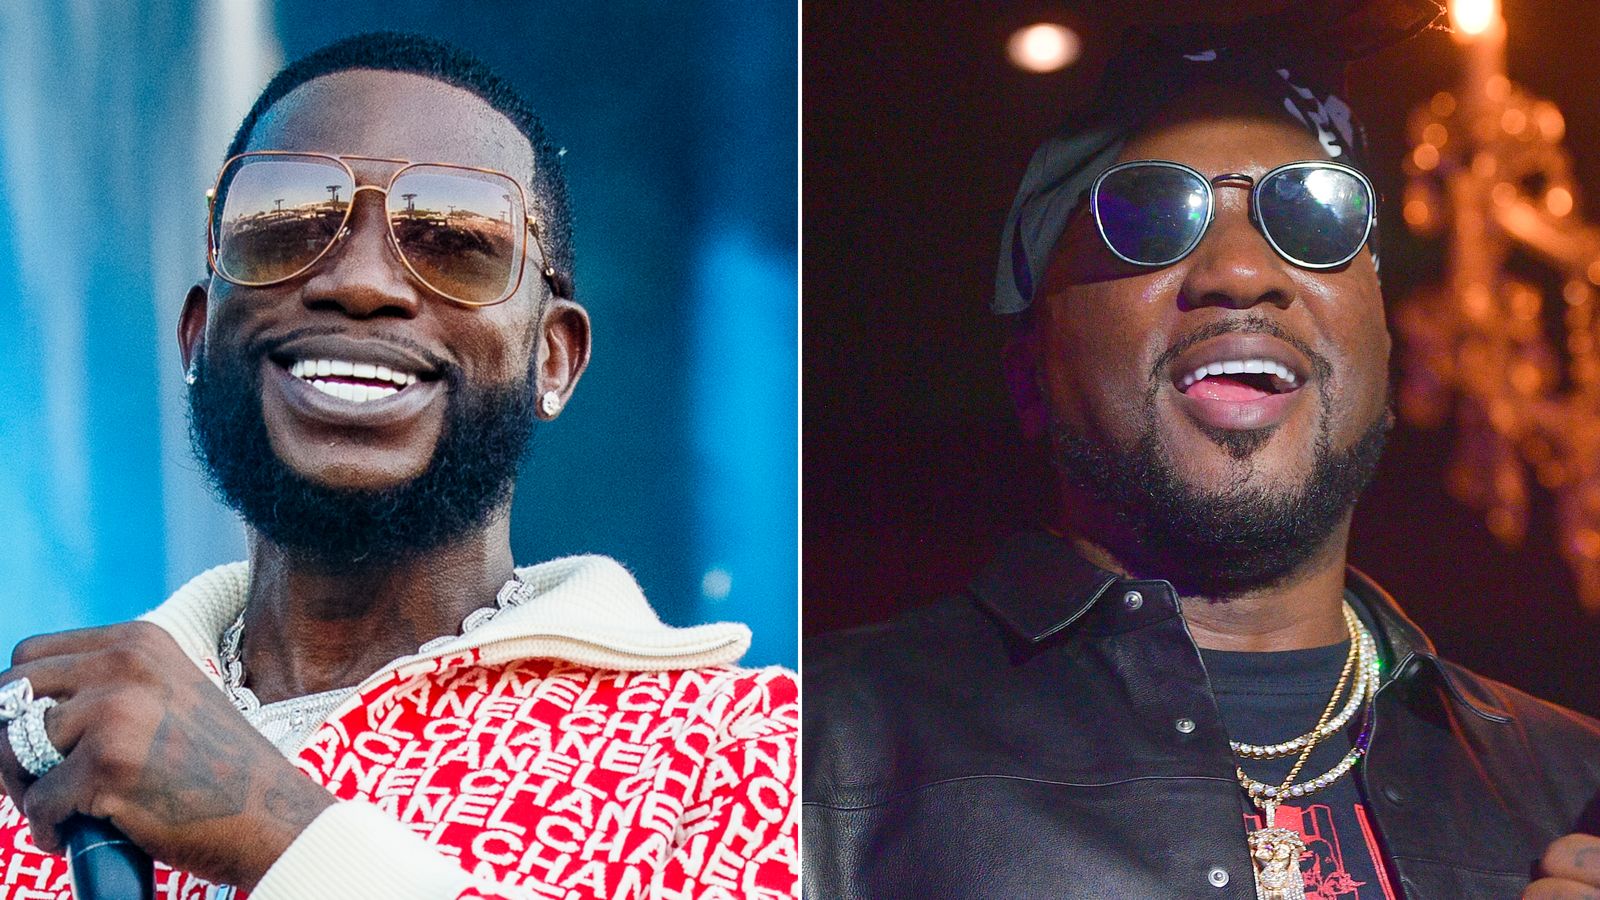 Rappers Gucci Mane and Jeezy Verzuz battle ends peacefully, despite some  jabs, drawing at least  people | CNN